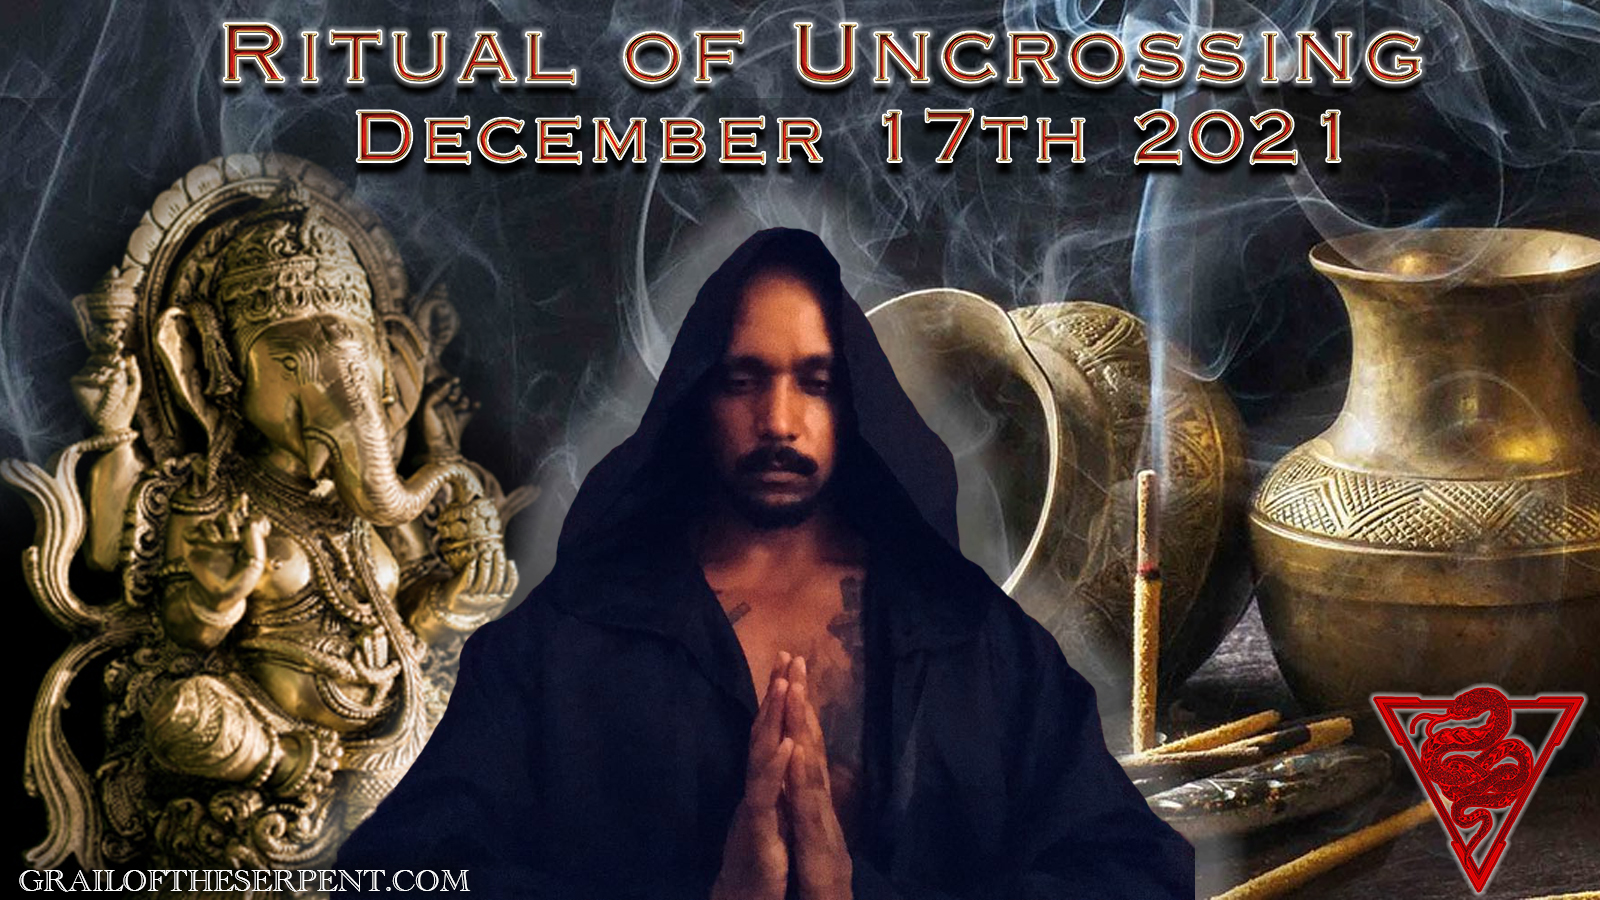 Ritual Of Uncrossing Friday December 17th 2021